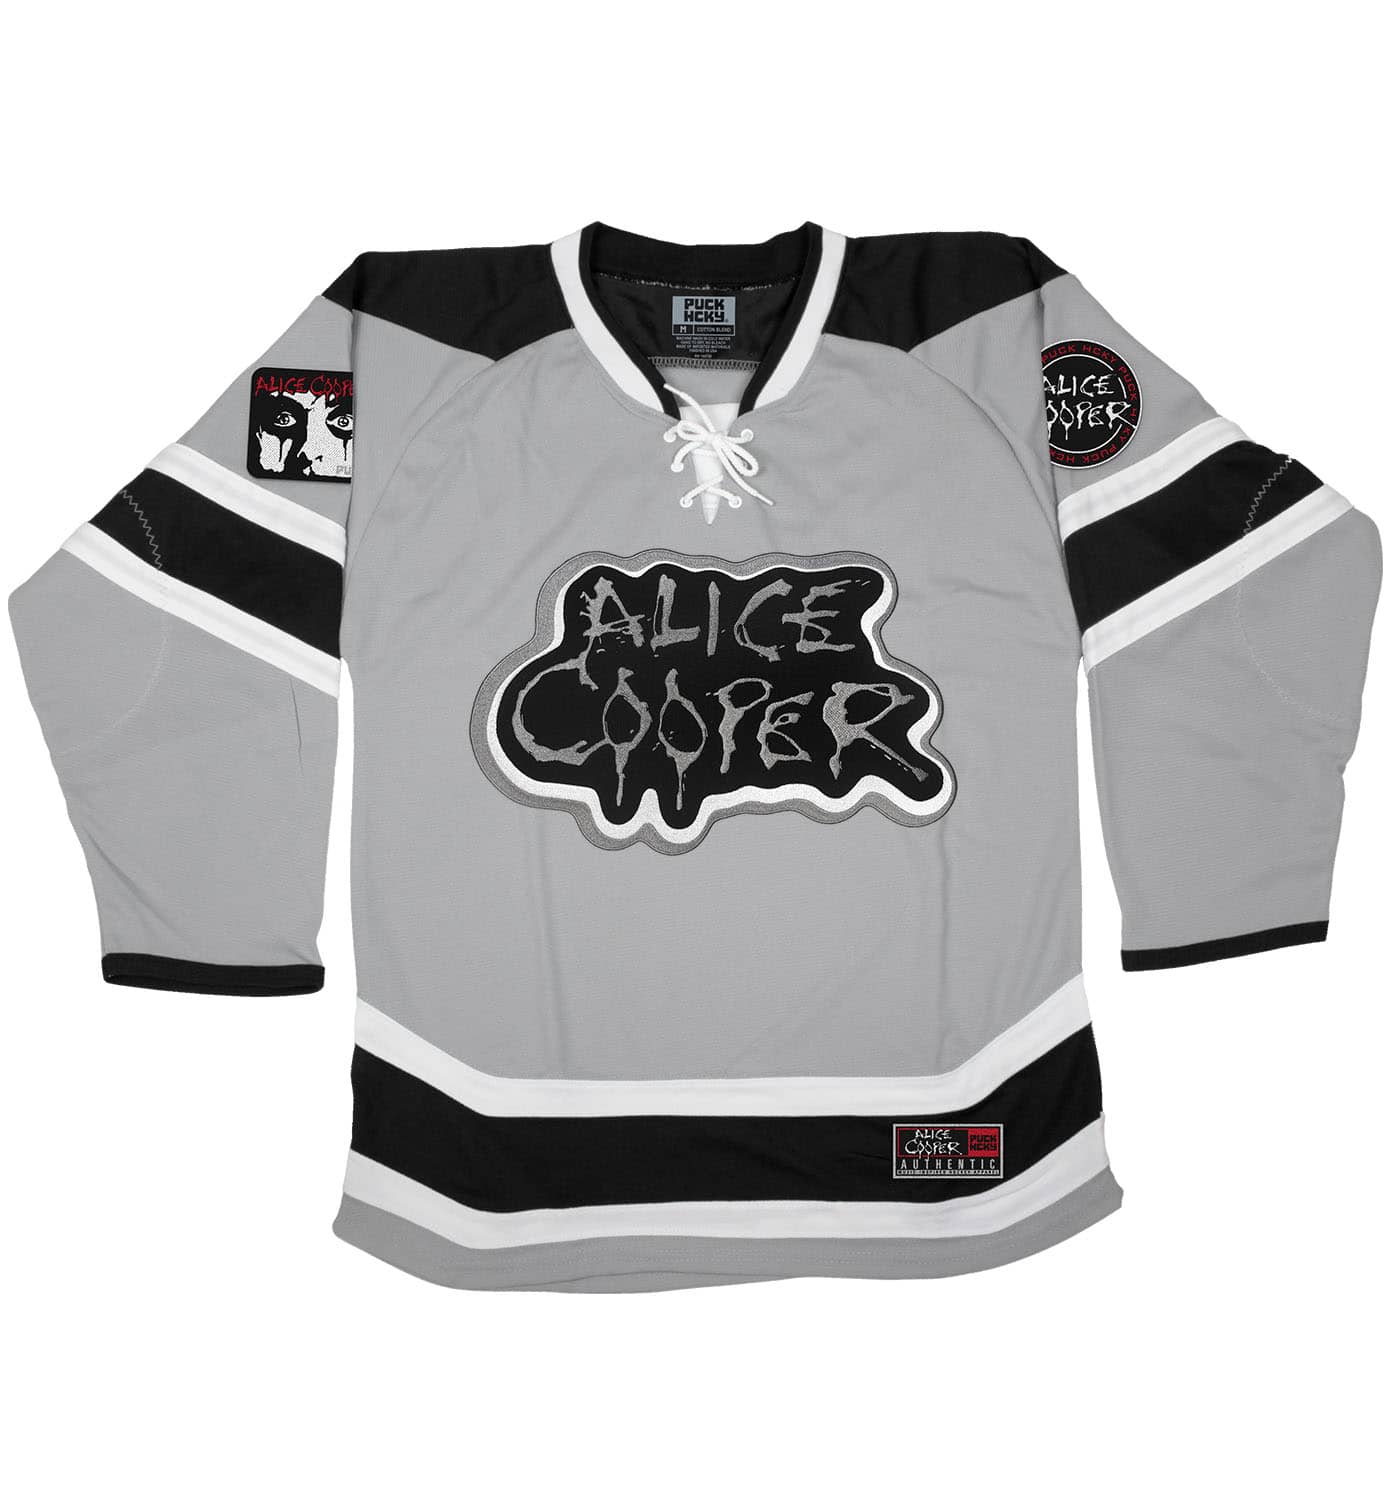 ALICE COOPER 'CLASSIC' deluxe hockey jersey in grey, black, and white front view